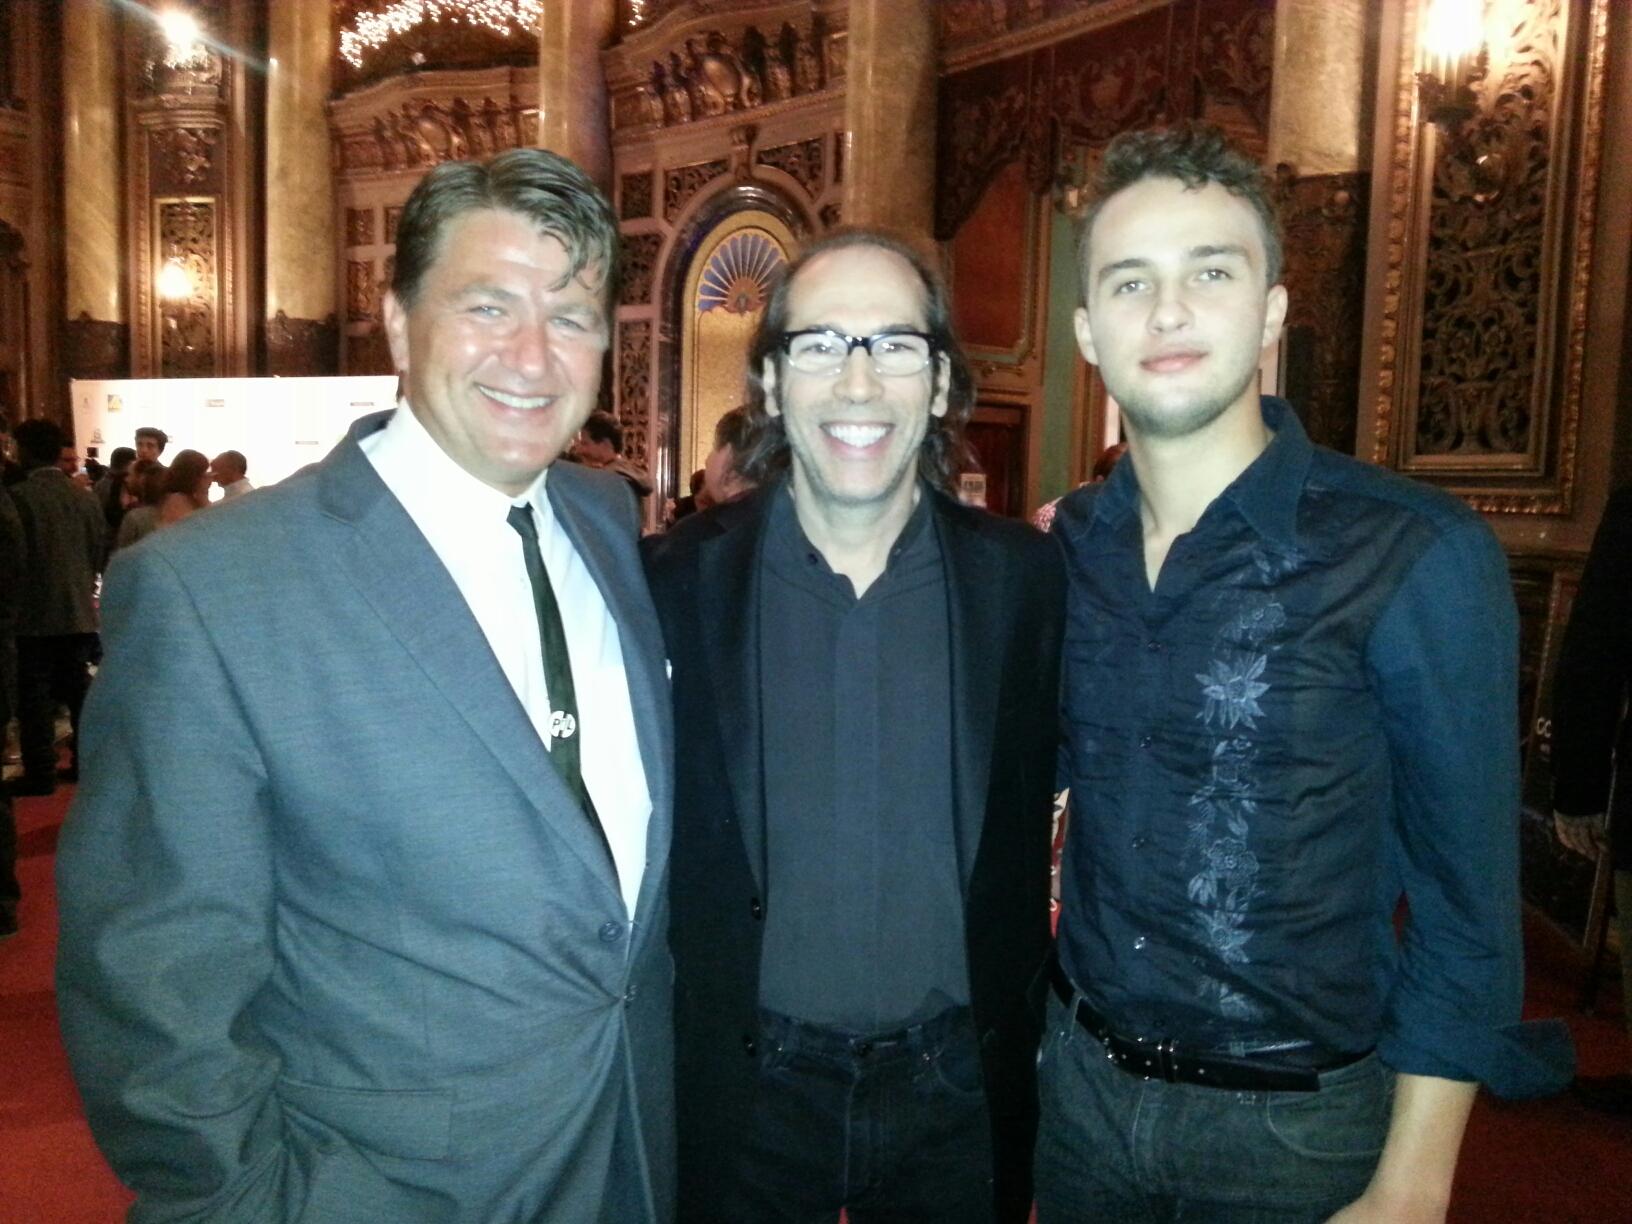 At the Golden Door International Film Festival, with director Martin Guigui (center) and actor Mojean Aria (right).